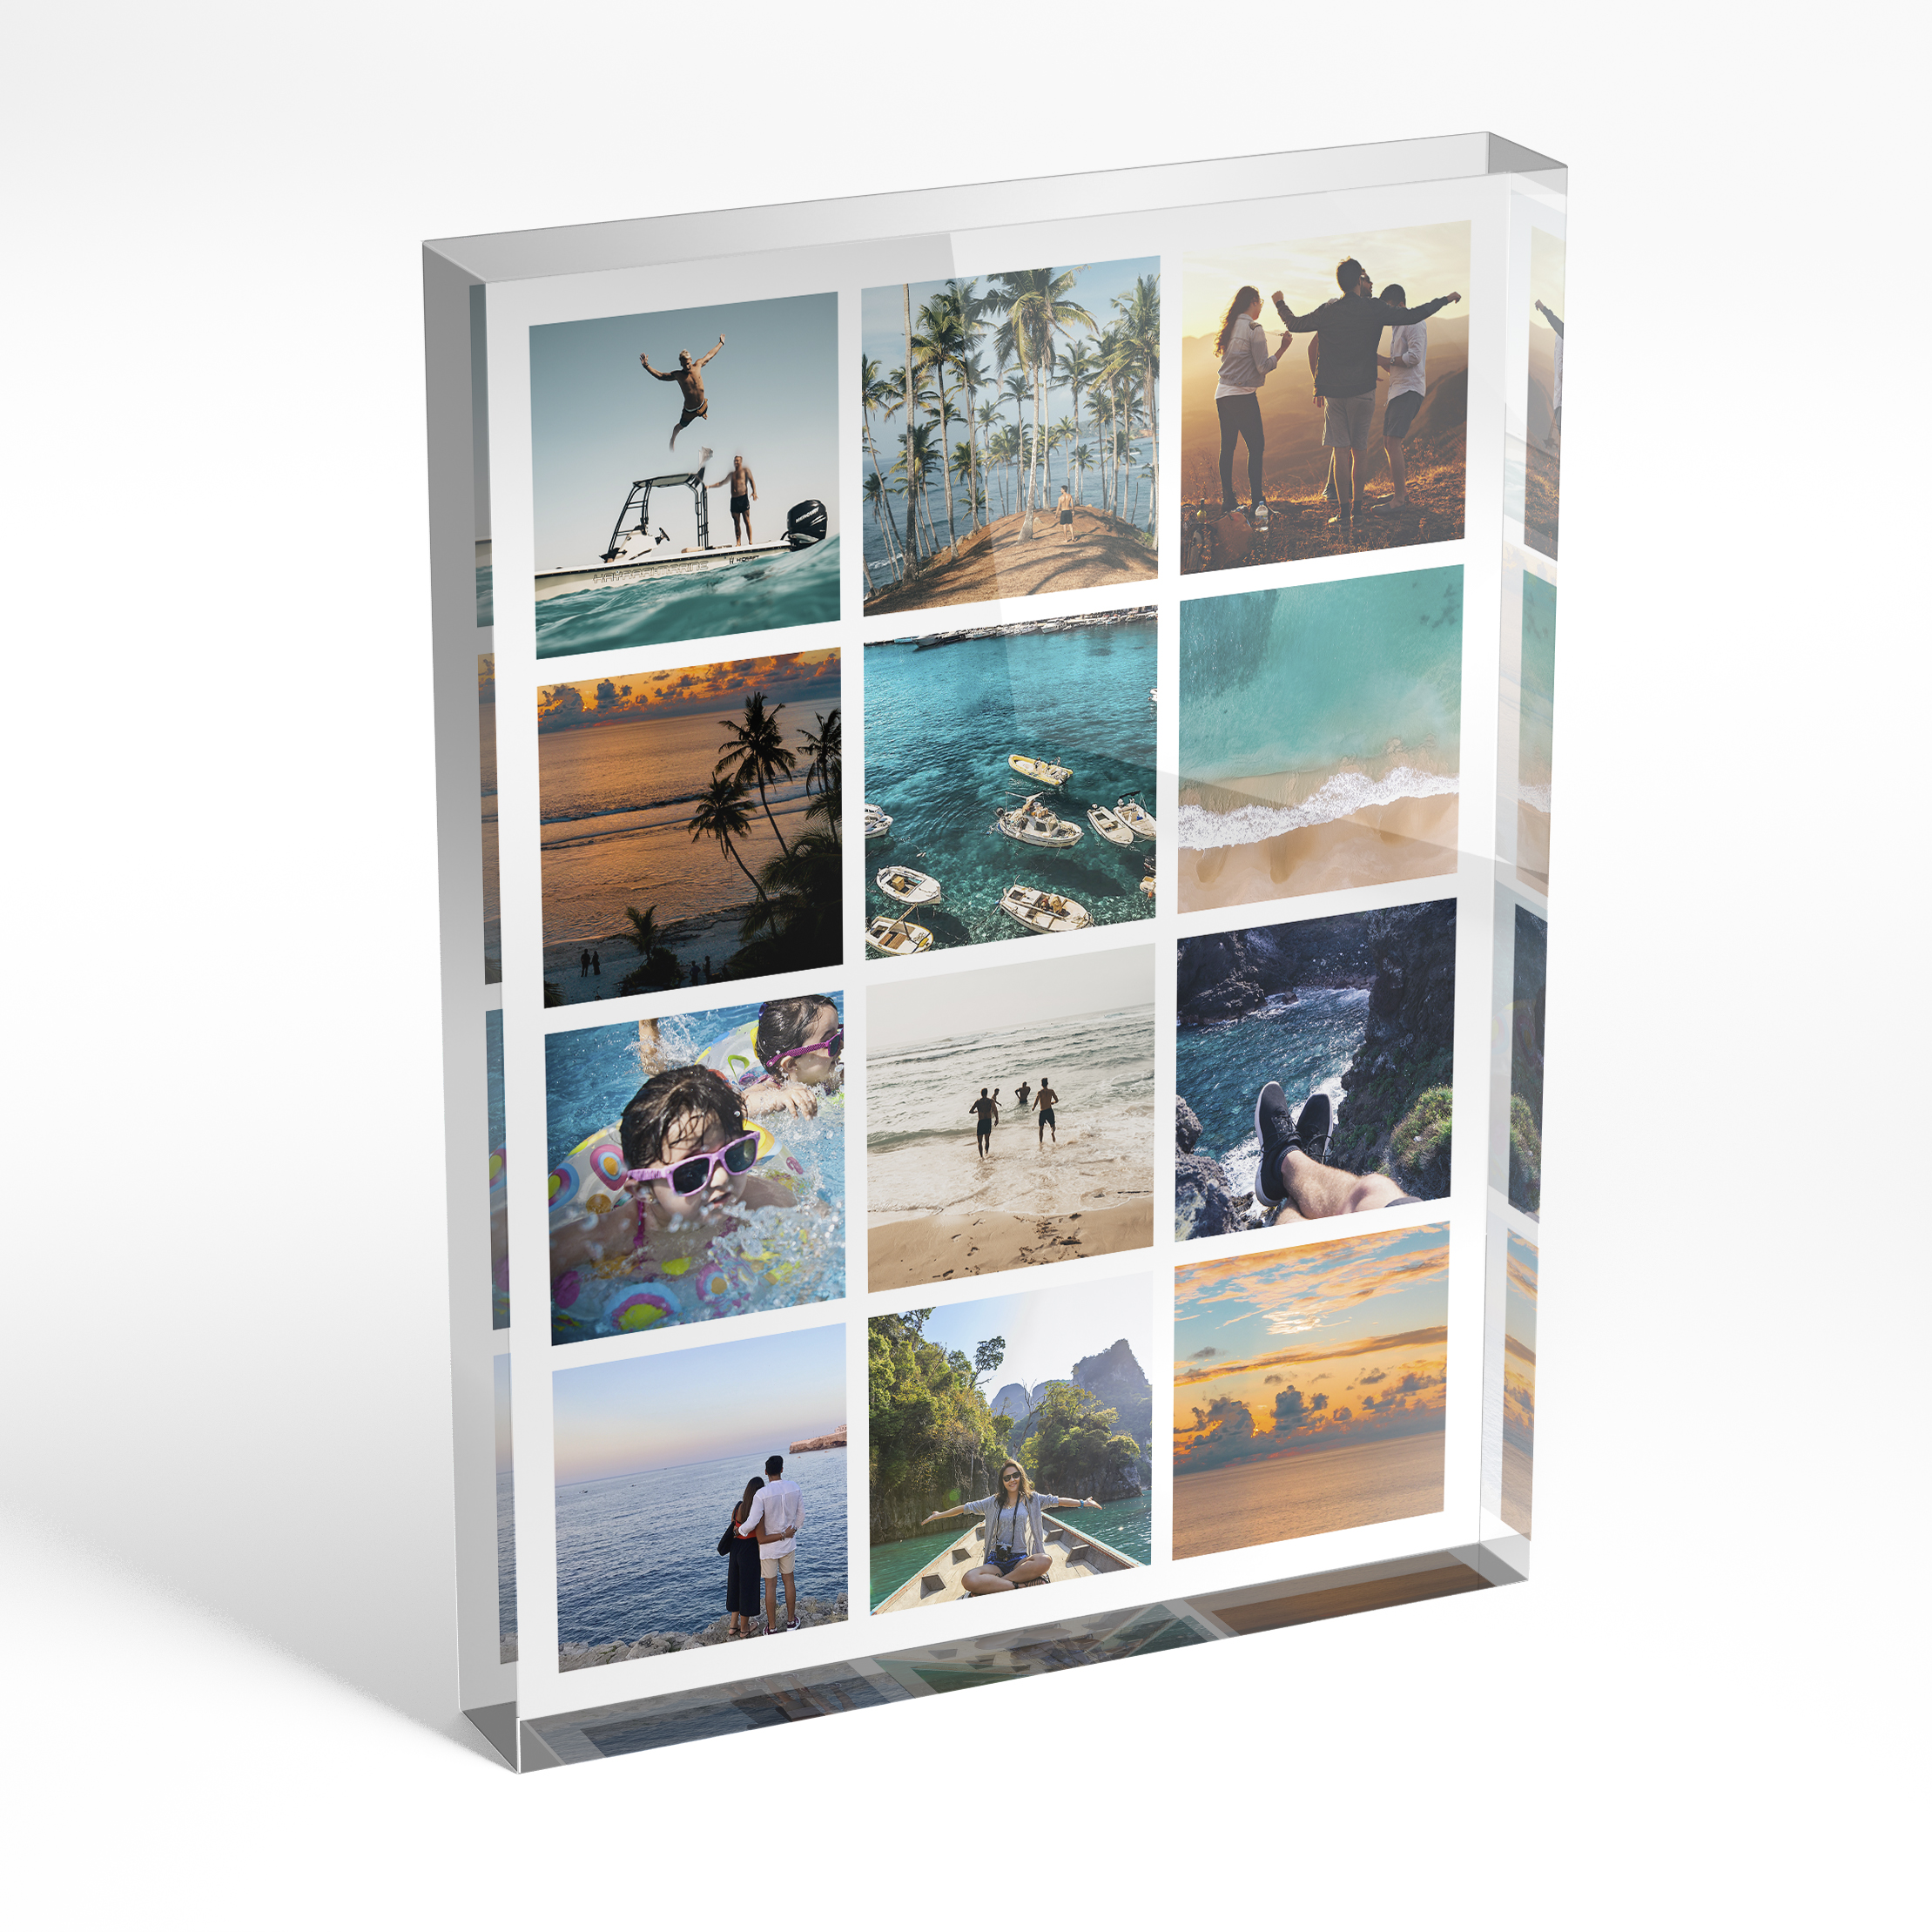 An angled side view of a portrait layout Acrylic Photo Block with space for 10+ photos. Thiis design is named "Holiday Keepsake". 